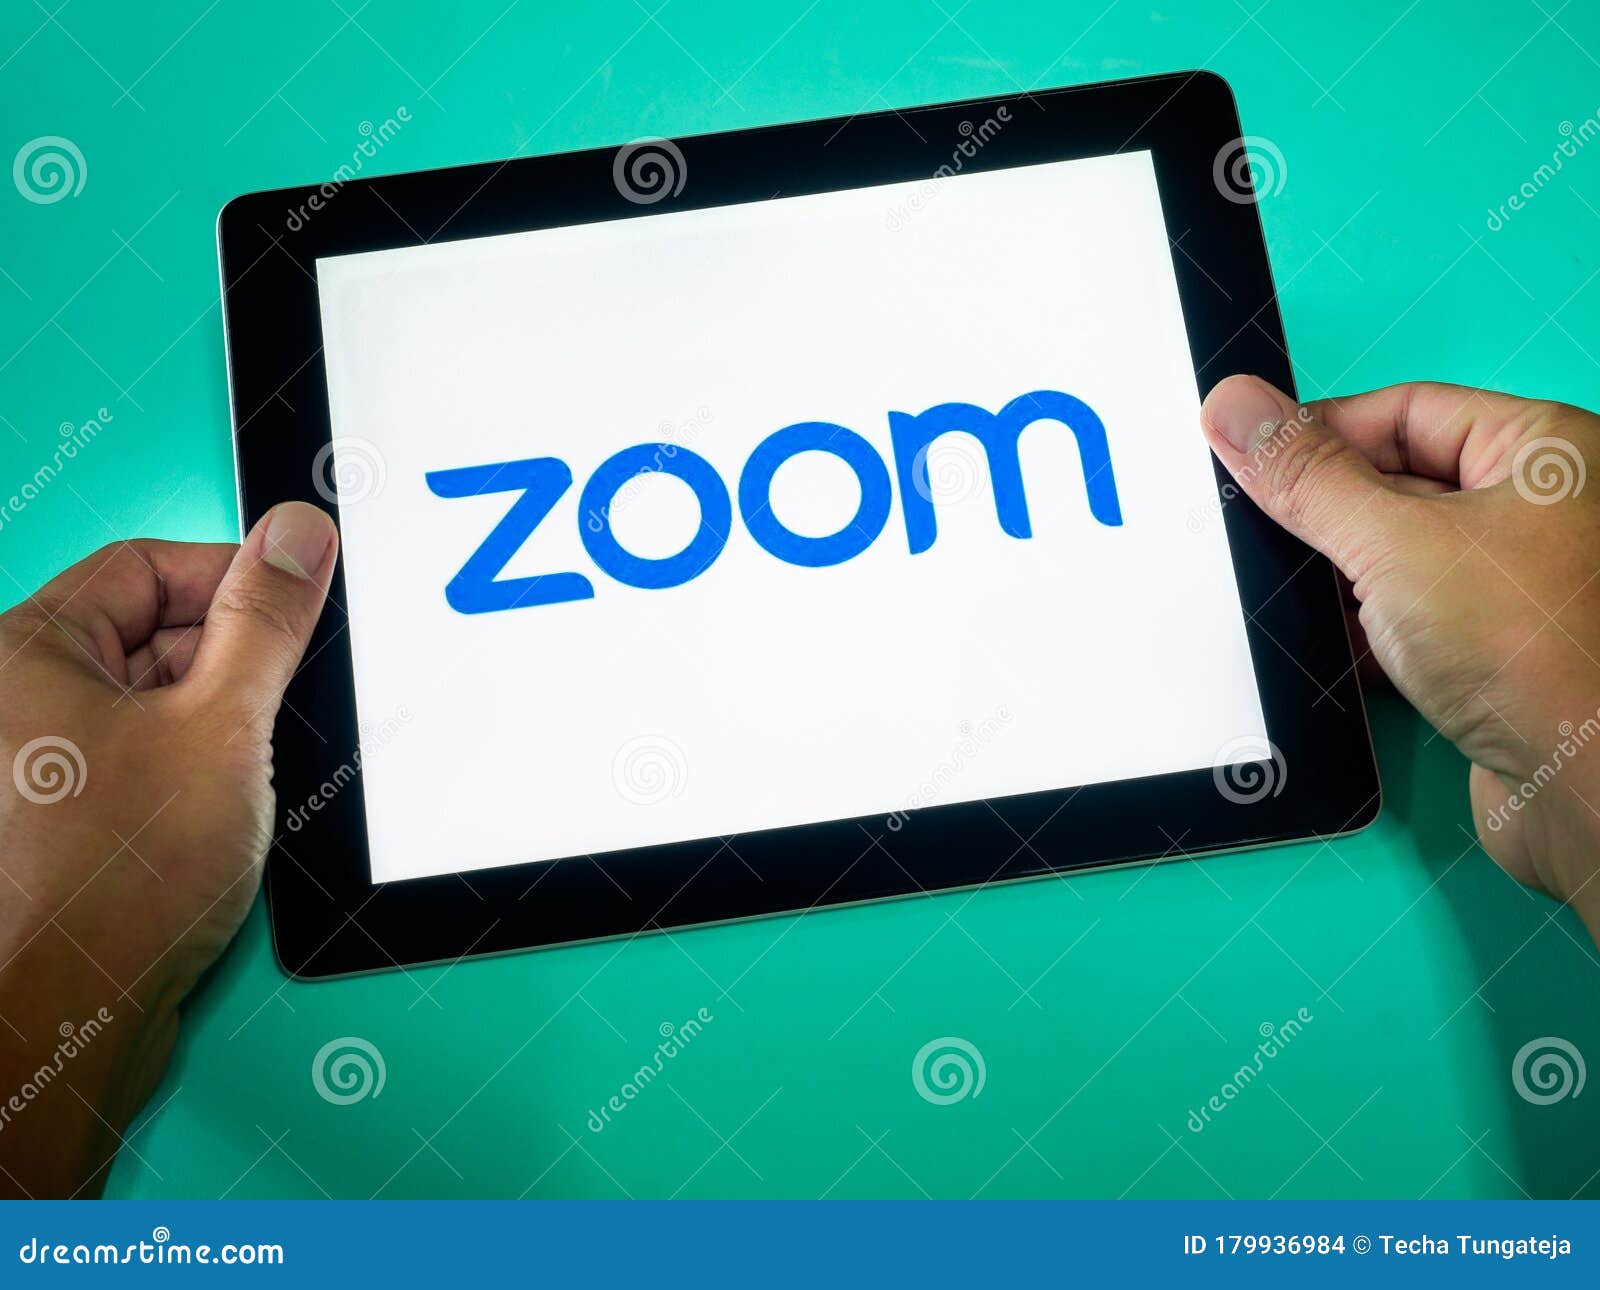 how to download zoom app on tablet